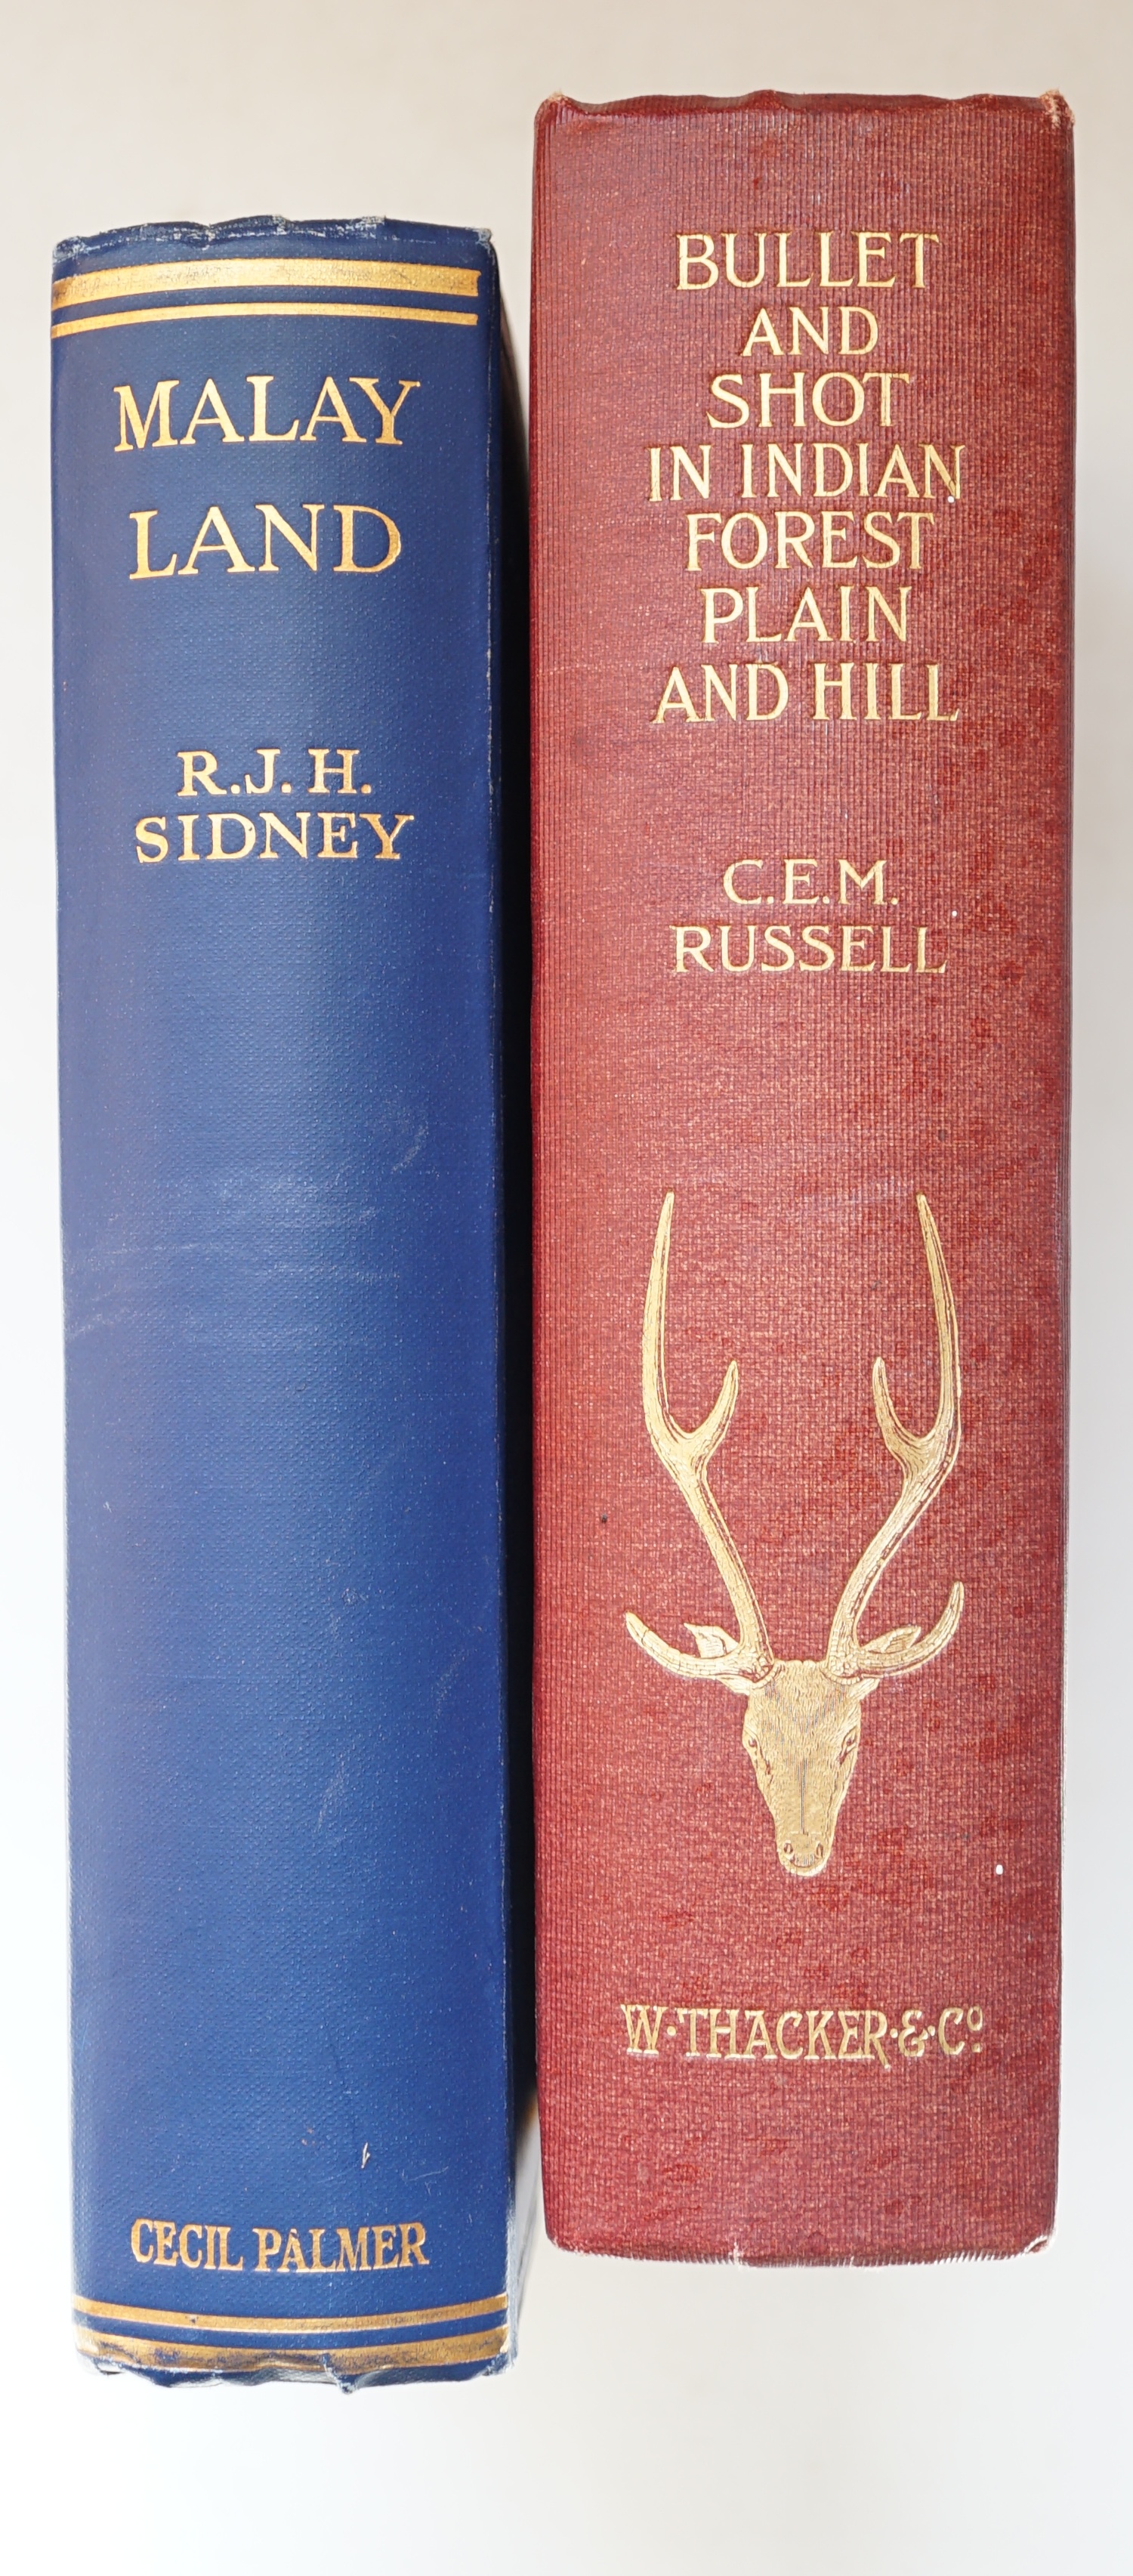 Russell, C.E.M - Bullet and Shot in Indian Forest, Plain and Hill, 2nd edition, 8vo, original pictorial red cloth gilt, ink ownership inscription to front fly-leaf, with tissue guarded frontispiece, London, 1900; Sidney,